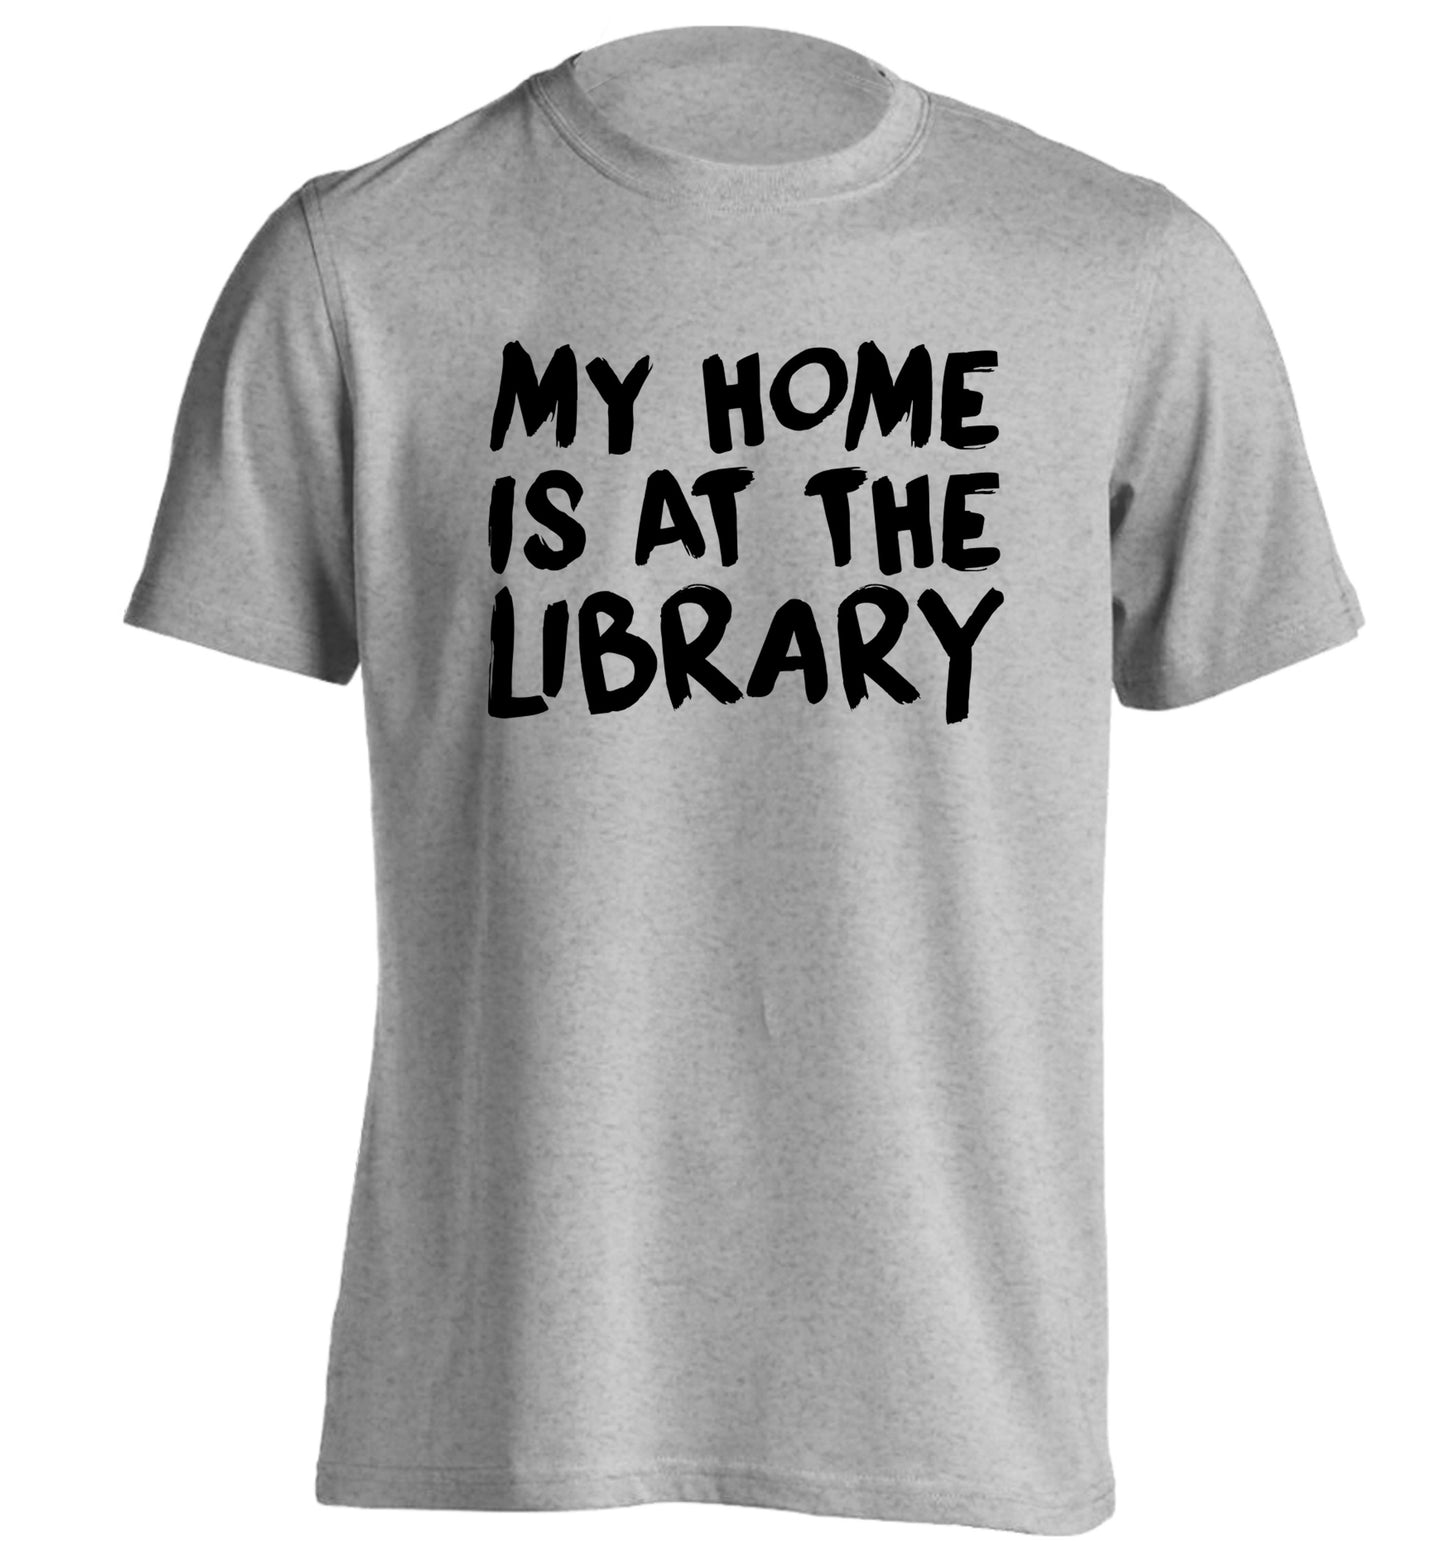 My home is at the library adults unisex grey Tshirt 2XL